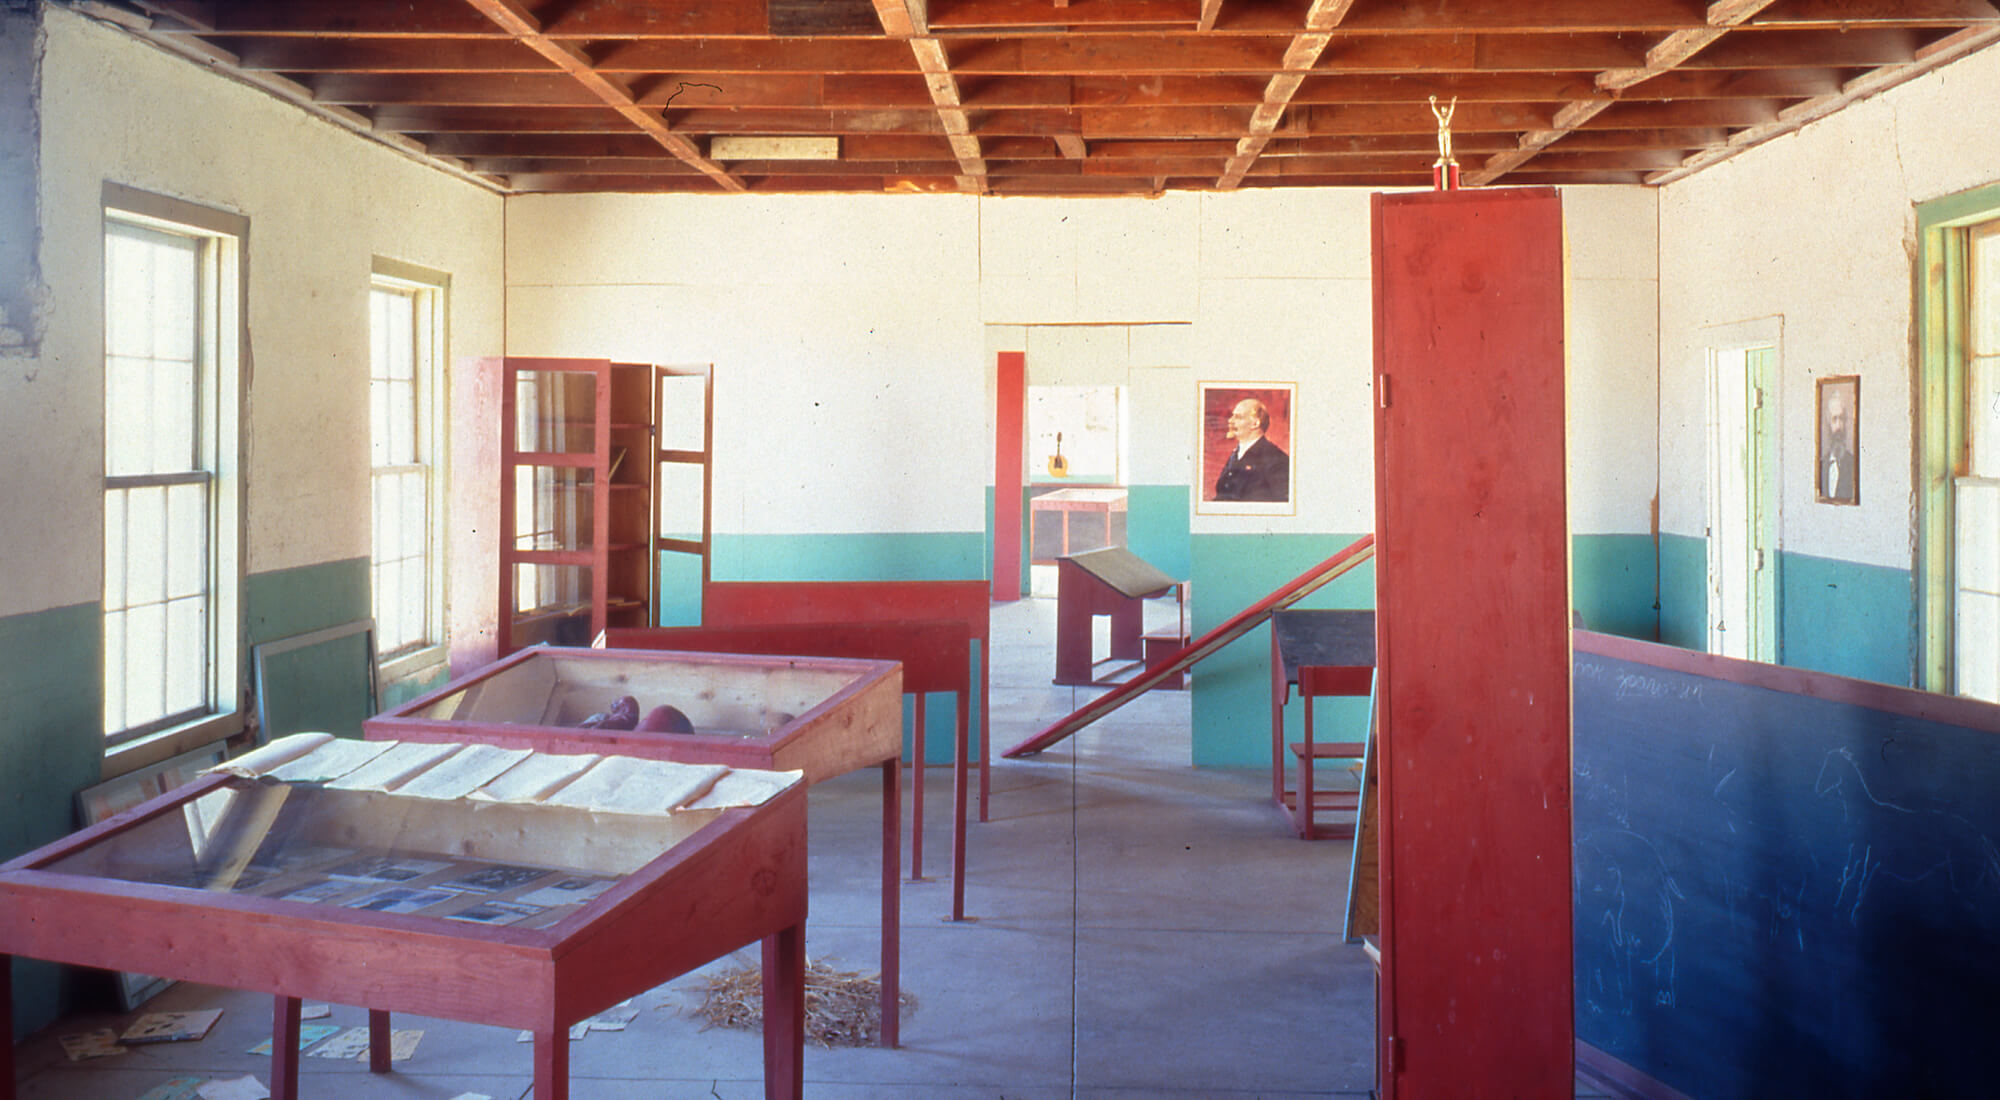 A permanent installation representing a Soviet school. Created by the artist for the Chinati Foundation, a contemporary art museum in Marfa, Texas. Photo: Florian Holzherr, Chinati Foundation.